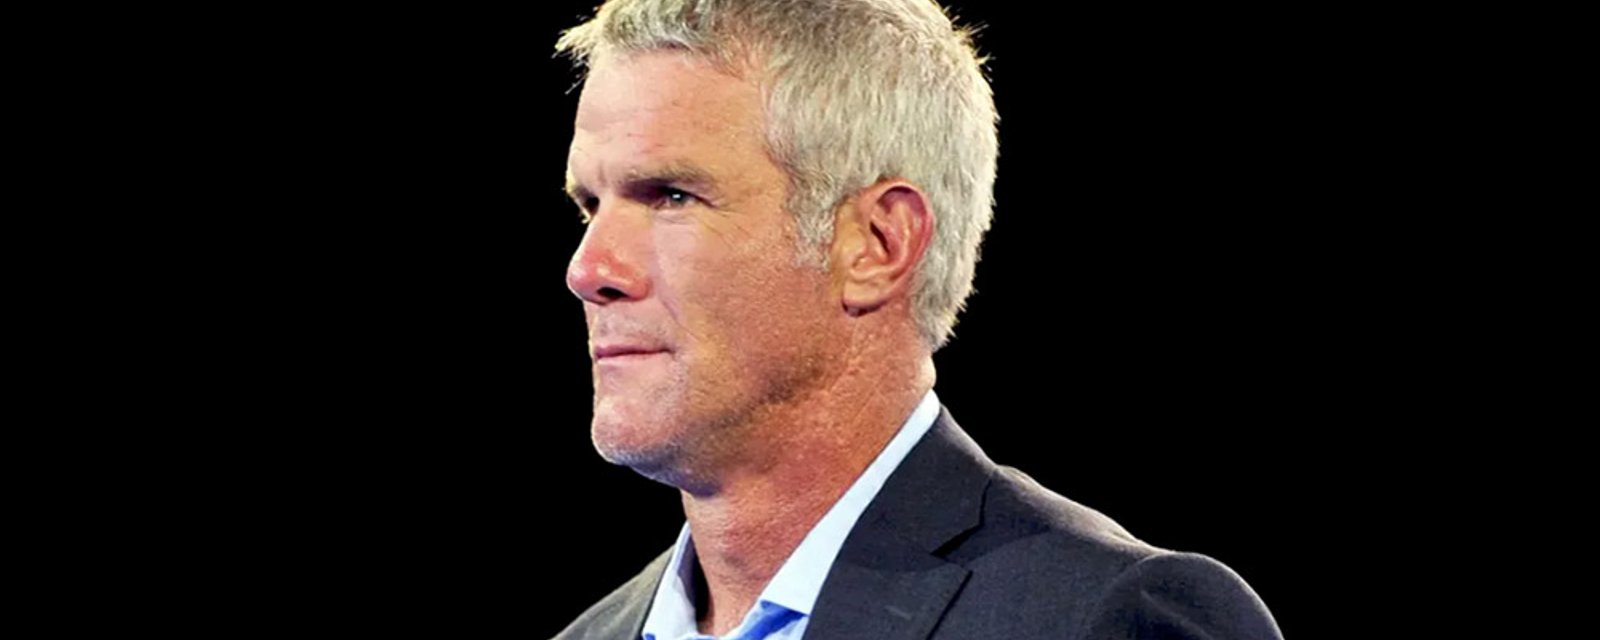 Shocking allegations against Green Bay Packers legend Brett Favre, who is facing civil lawsuit 